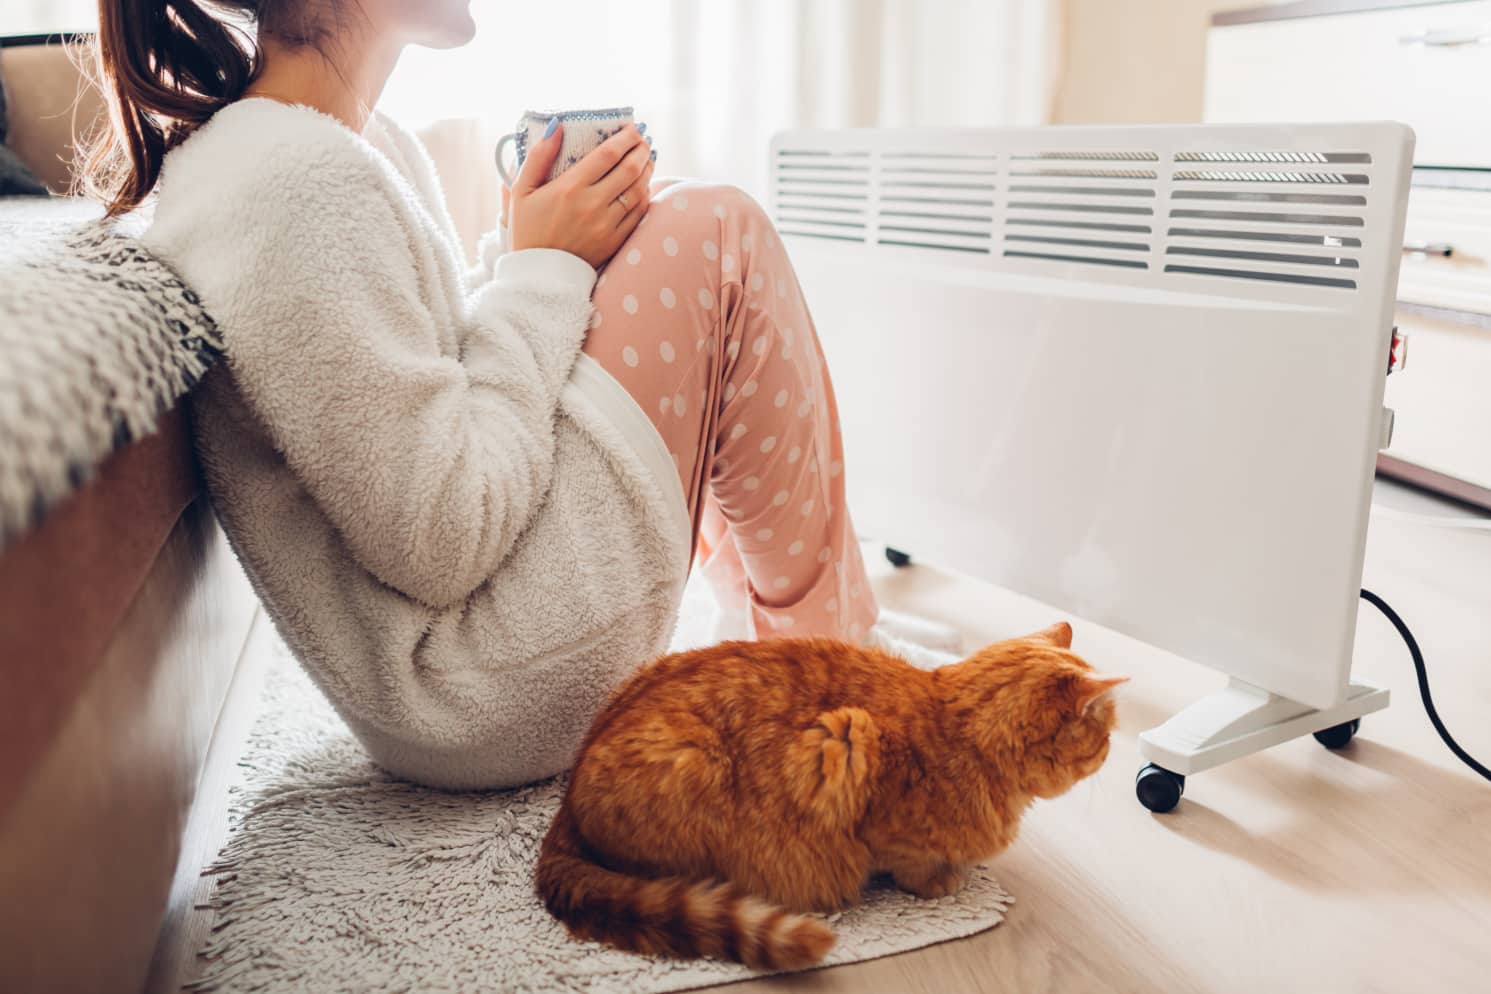 Woman with her cat sitting next to an electric heater, wearing warm clothes and drinking tea